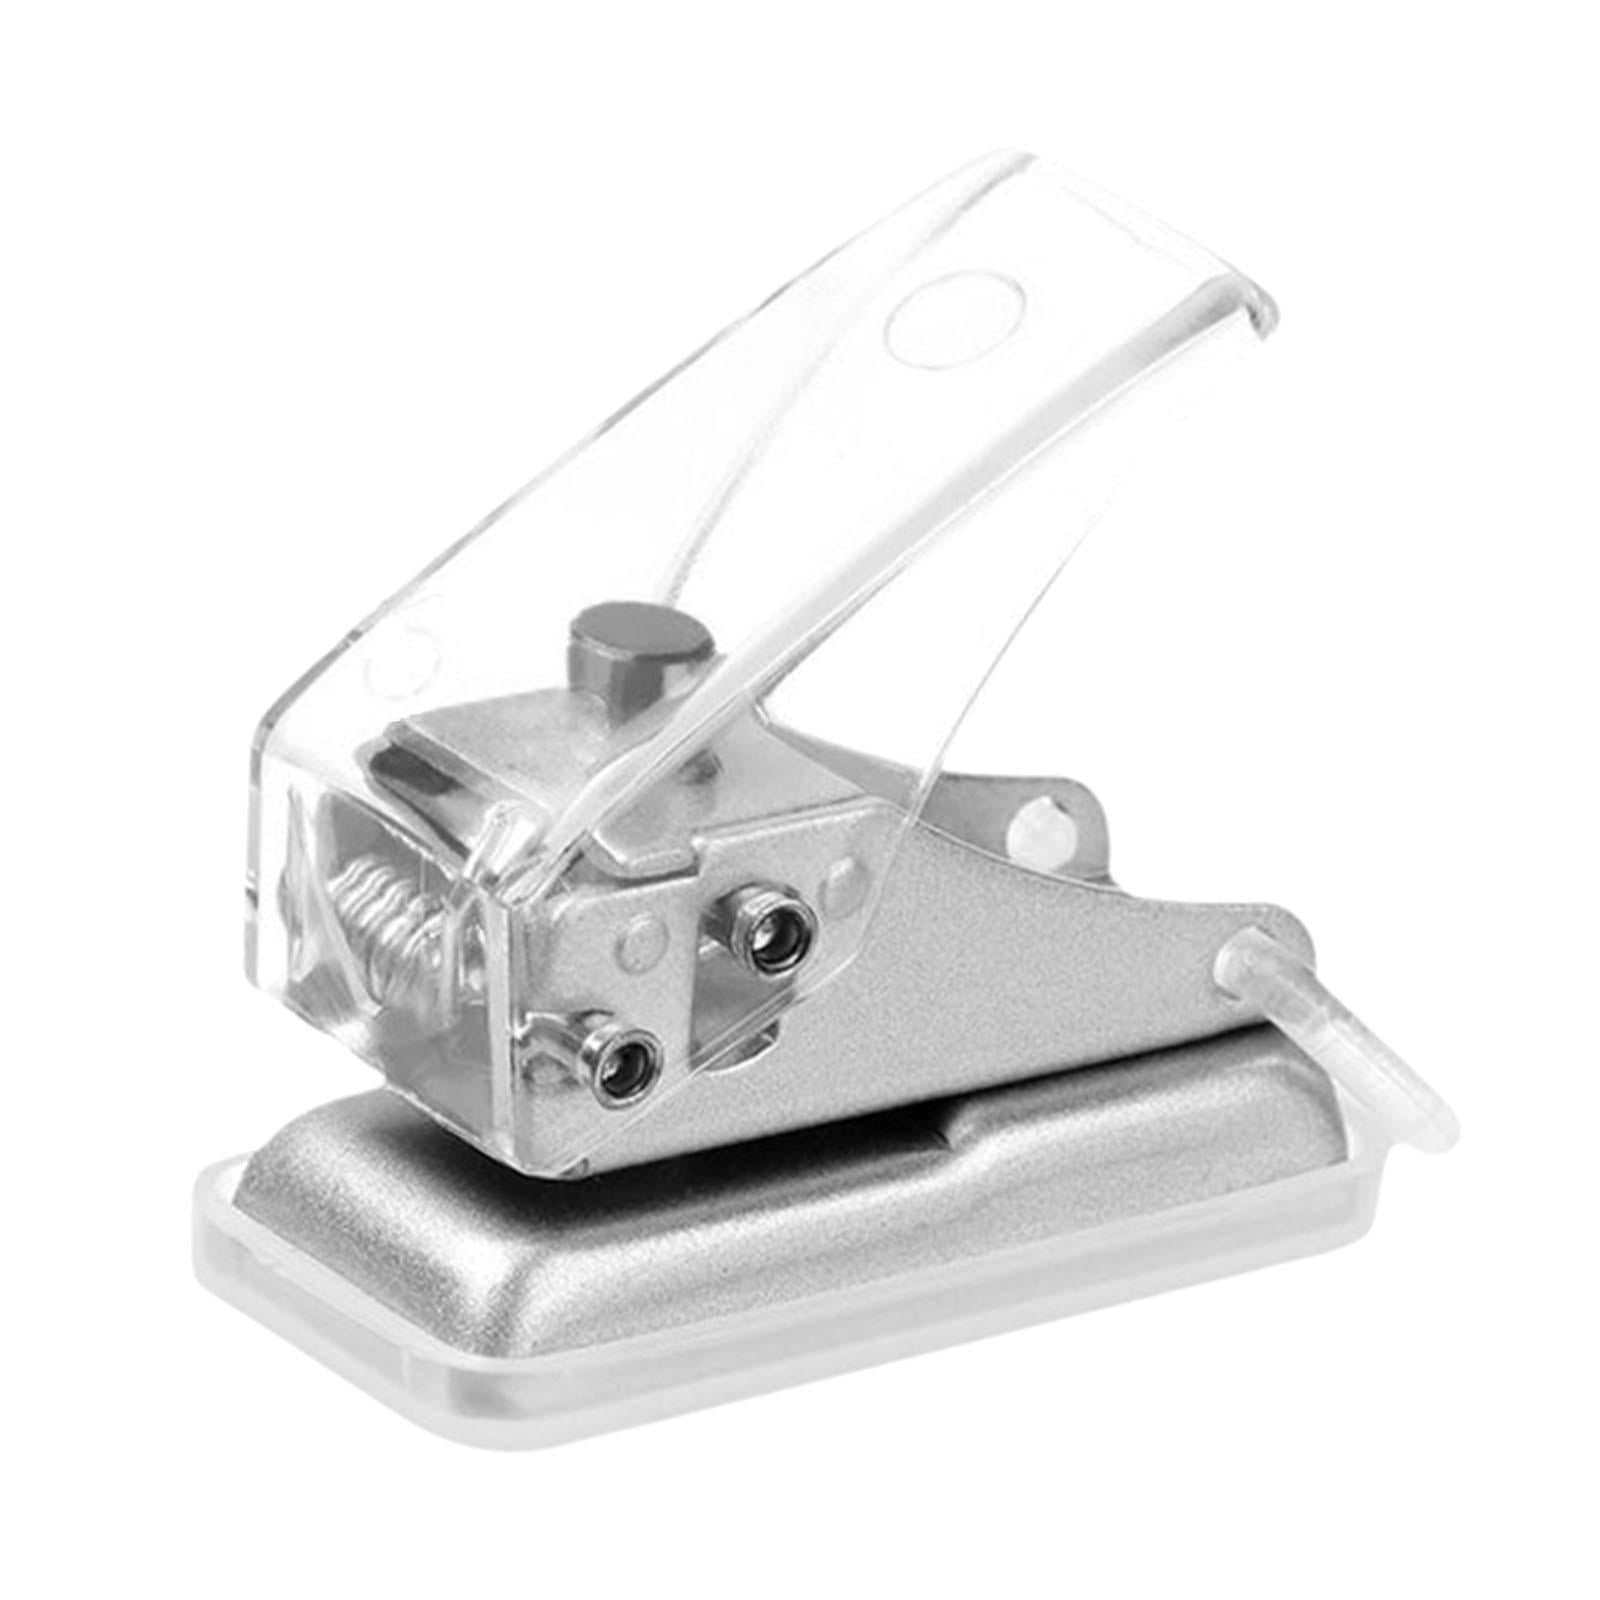 Westcott Single Hole Puncher, Handheld with Soft Grip, Scrapbooking and  Crafting Tool 